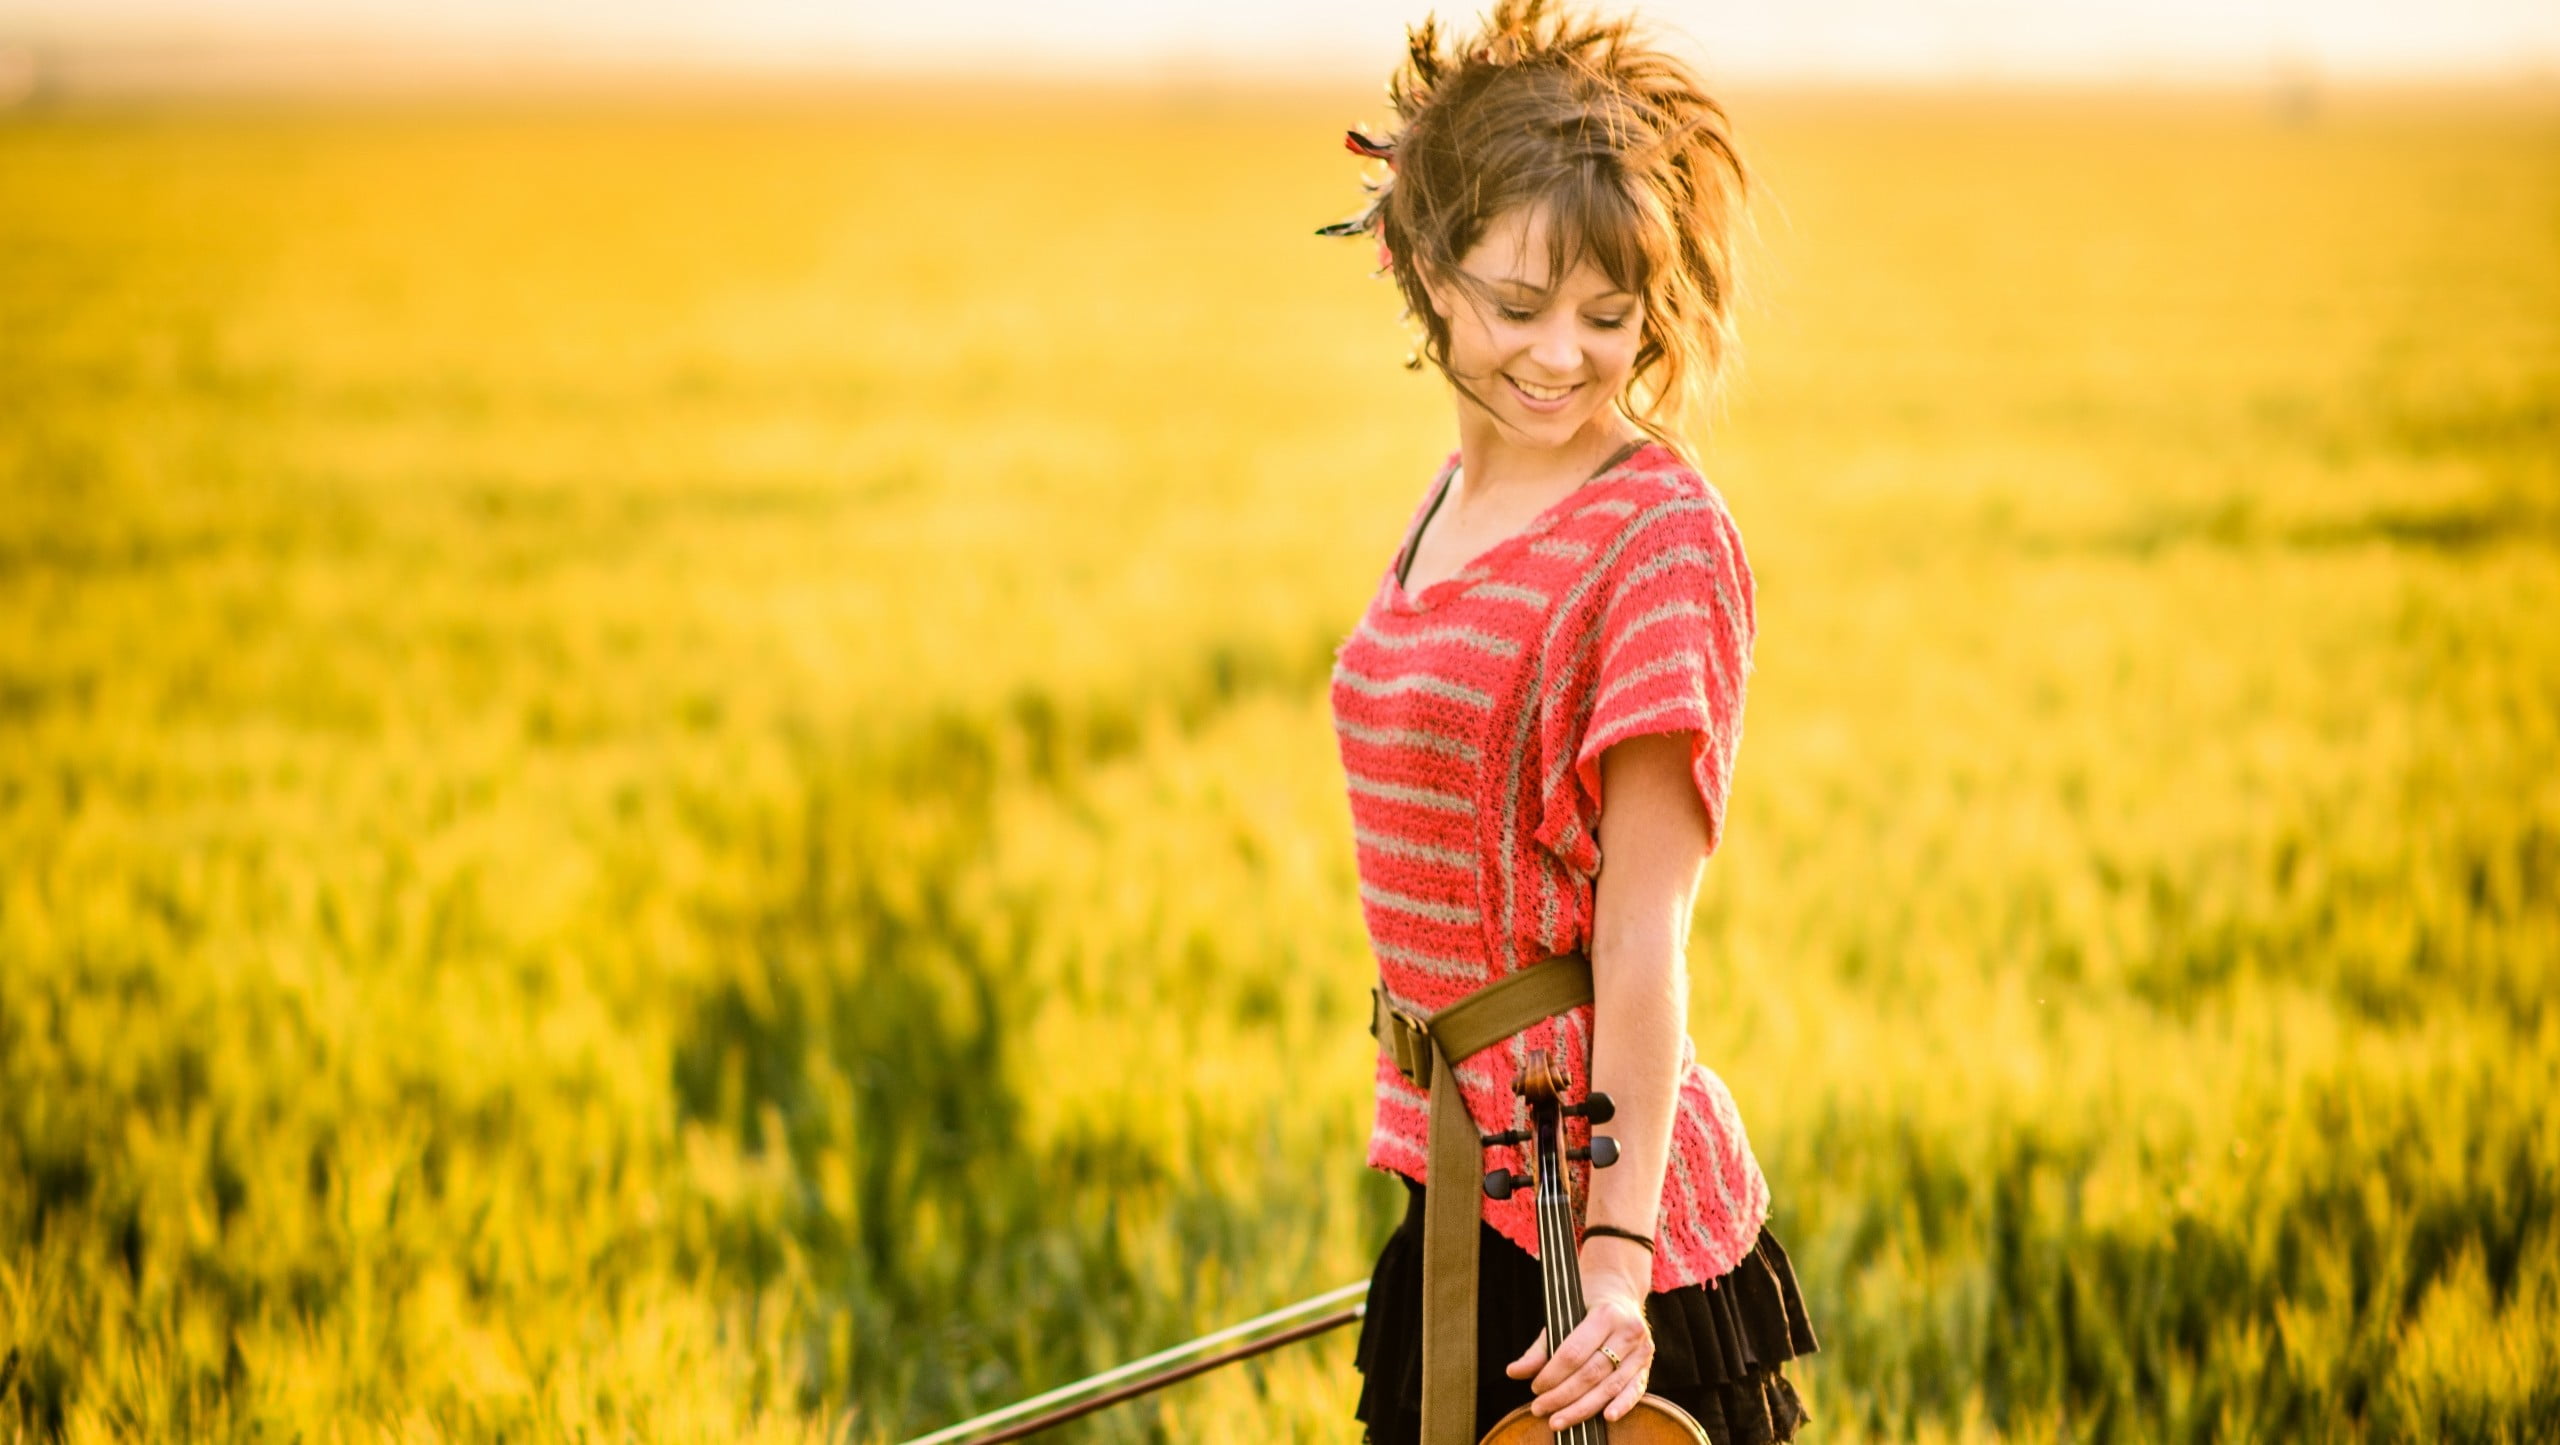 woman wearing pink and white striped shirt carries violin, Lindsey Stirling